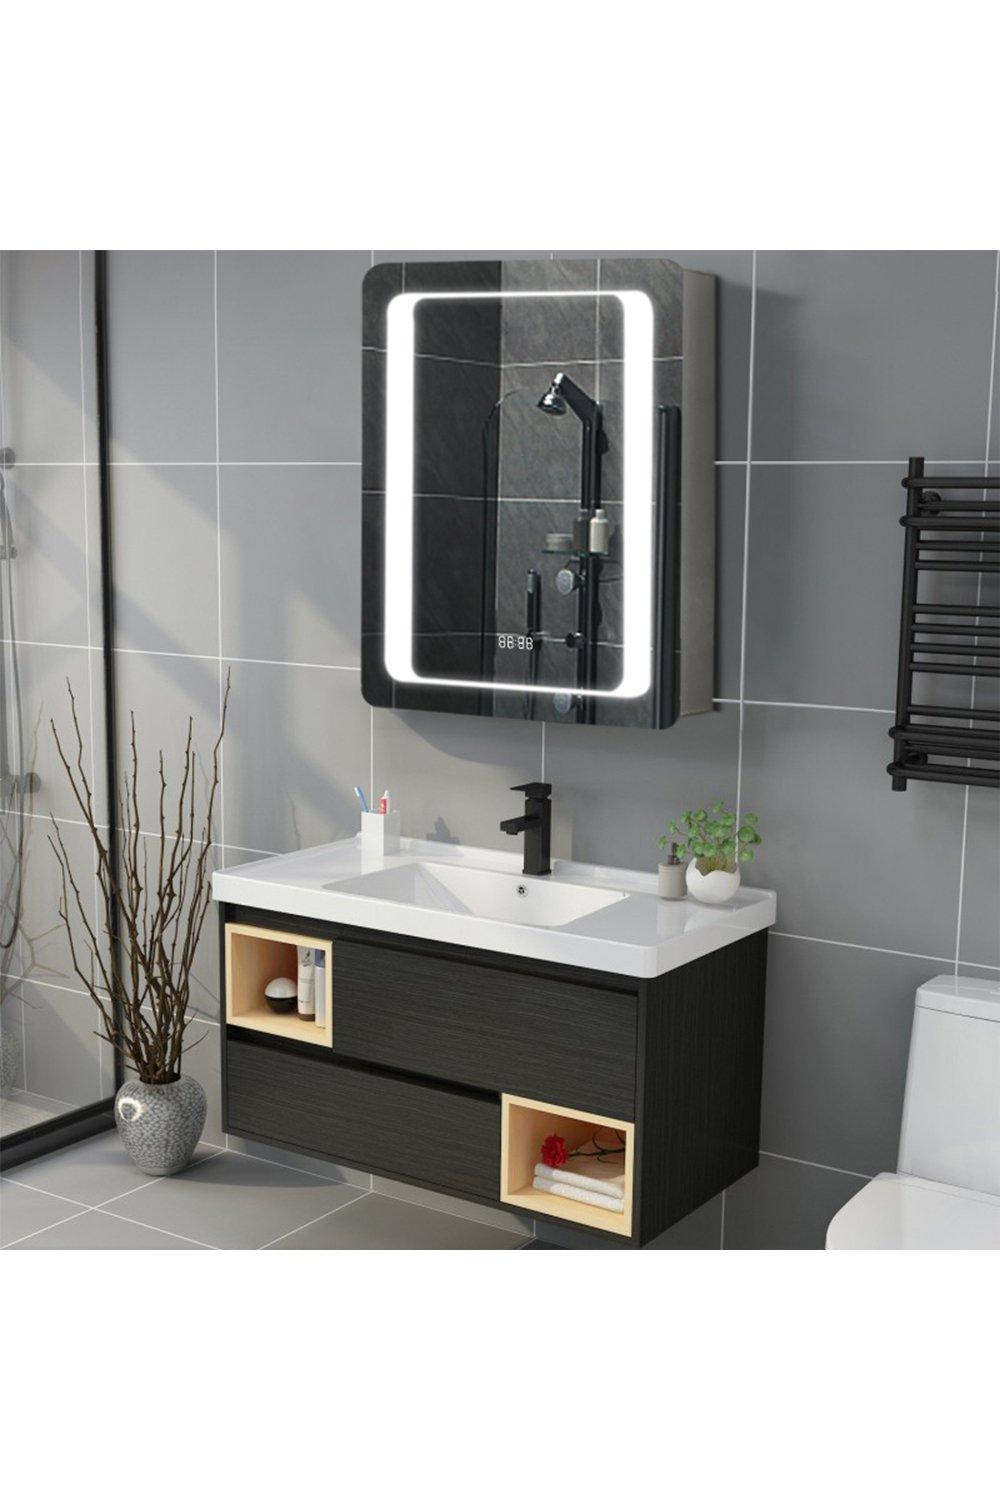 O-Shaped LED Anti-Fog Storage Mirror Cabinet with Sensor Switch and Clock